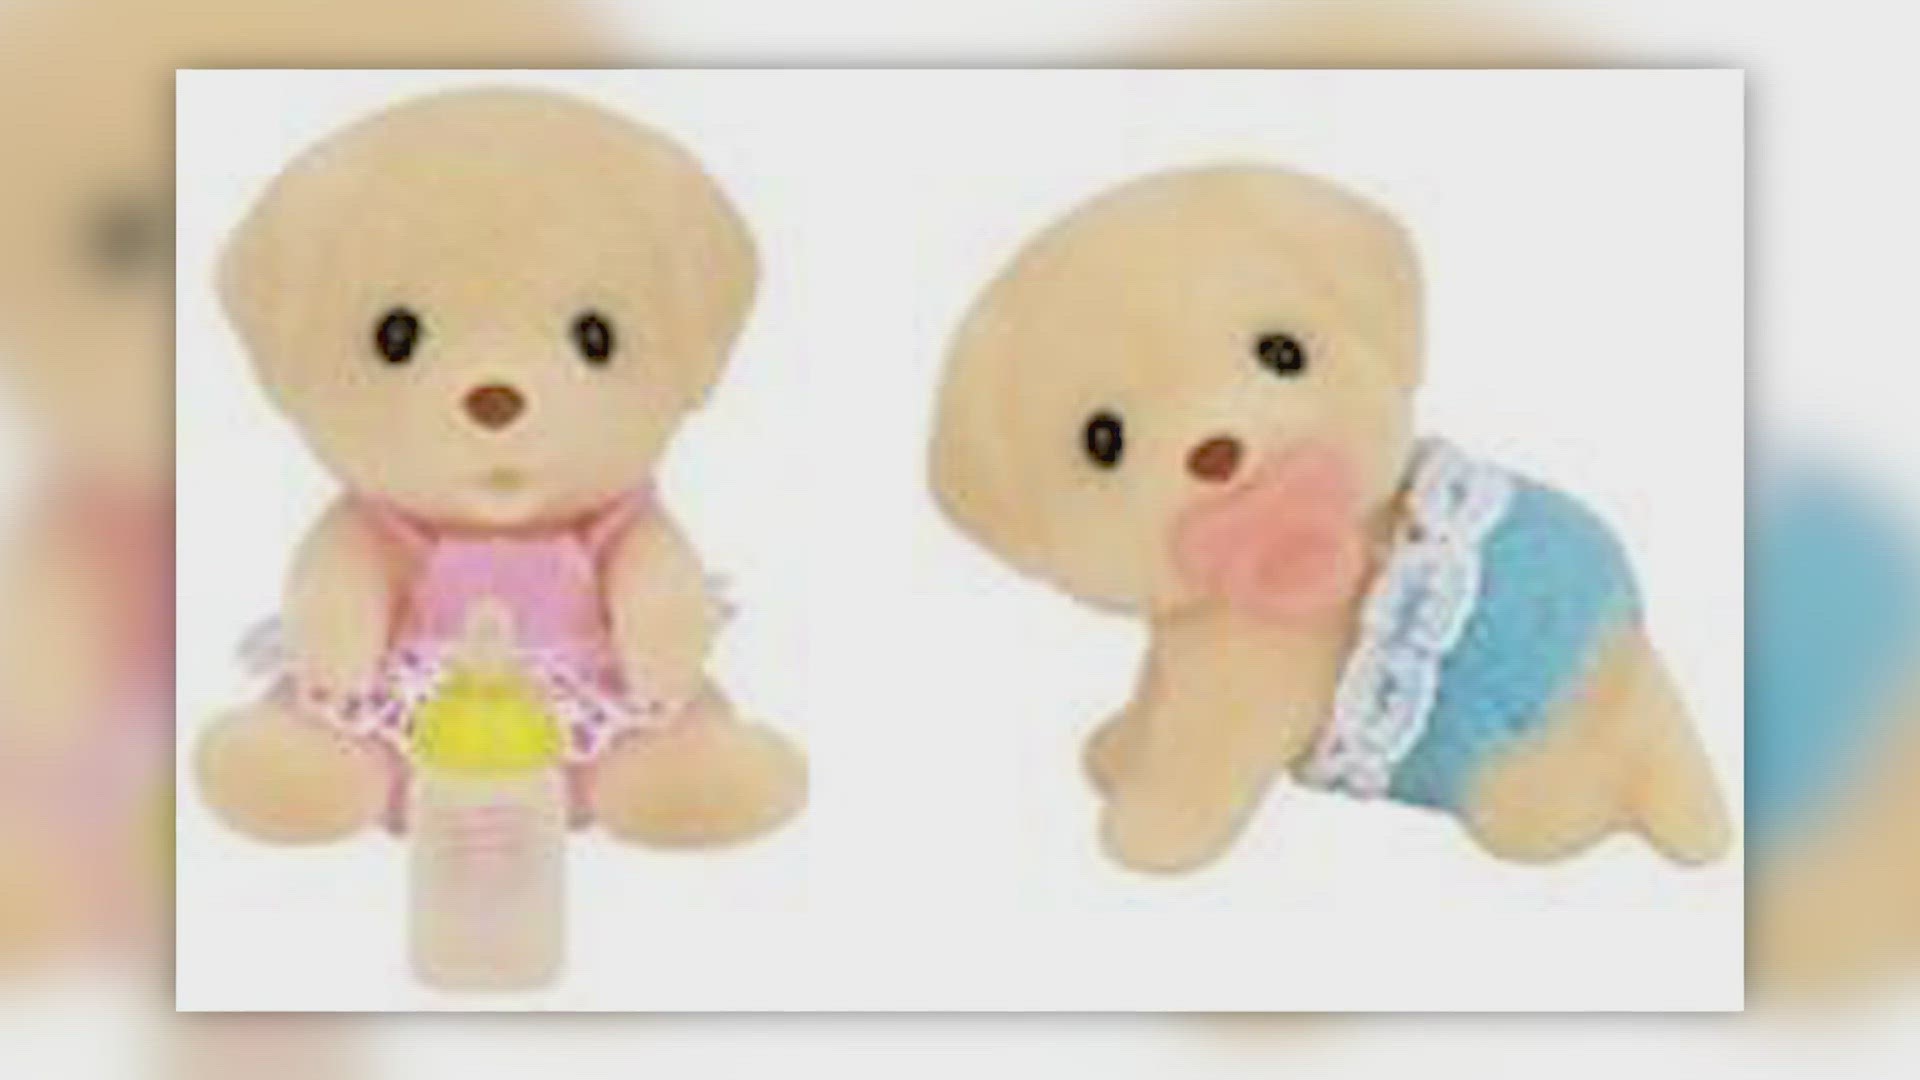 The recalled Calico Critters were sold at Walmart, Meijer and other stores nationwide and online from January 2000 through December 2021.